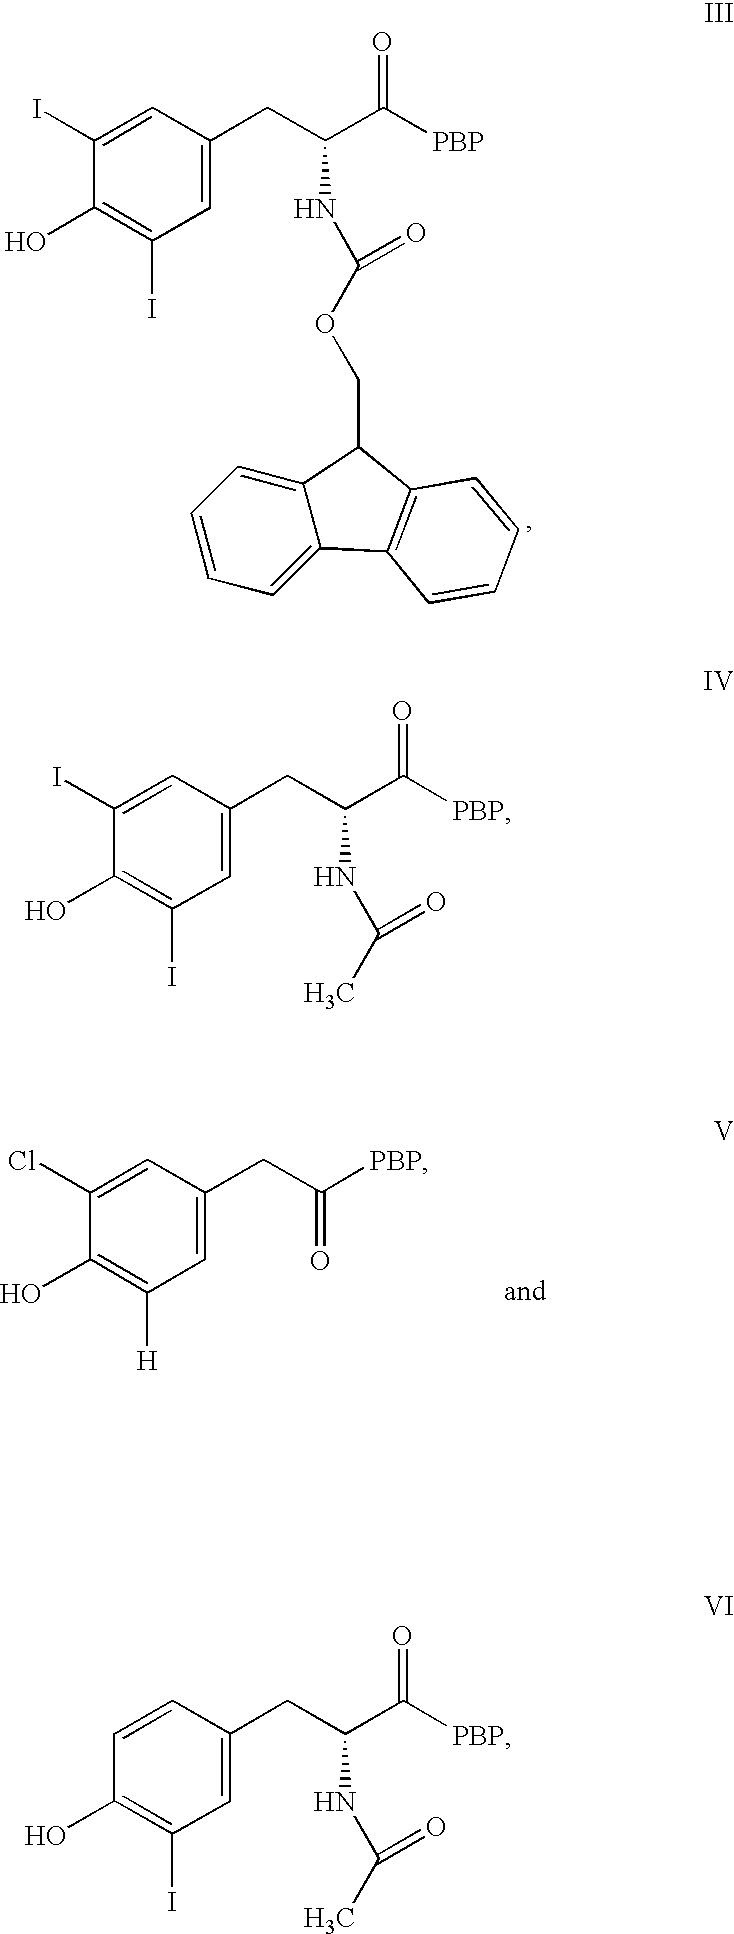 Phycoerythrin labeled thyronine analogues and assays using labeled analogues